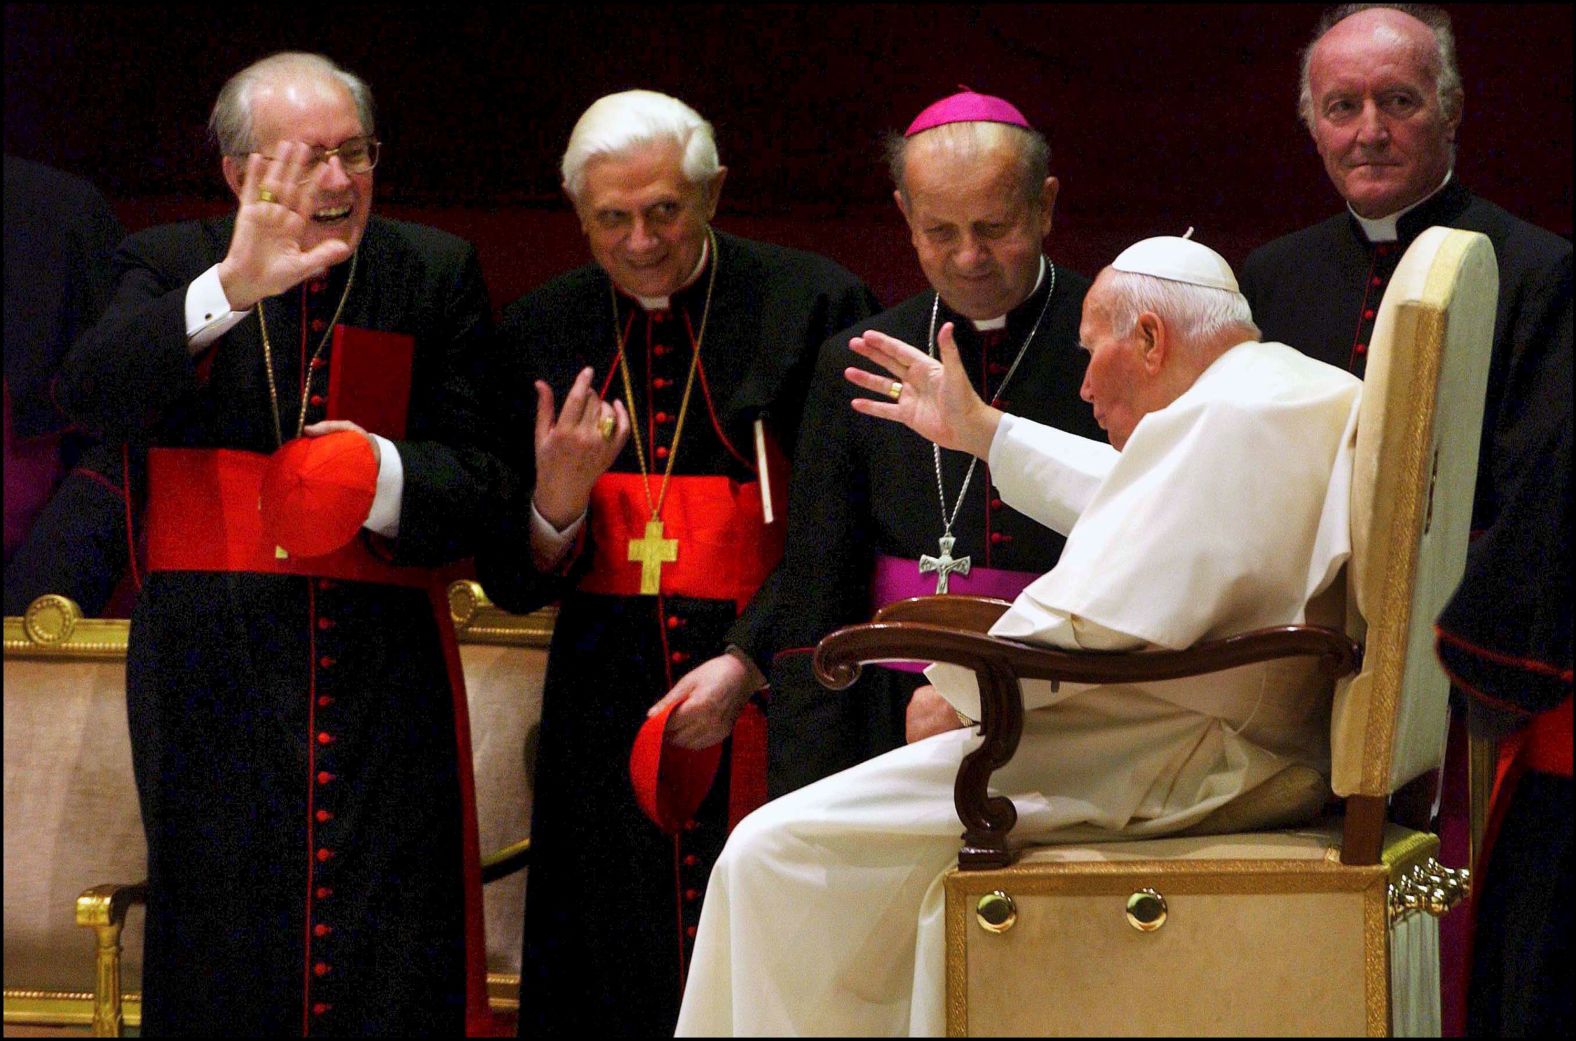 Benedict, second from left, is among several cardinals greeting Pope John Paul II in 2003.